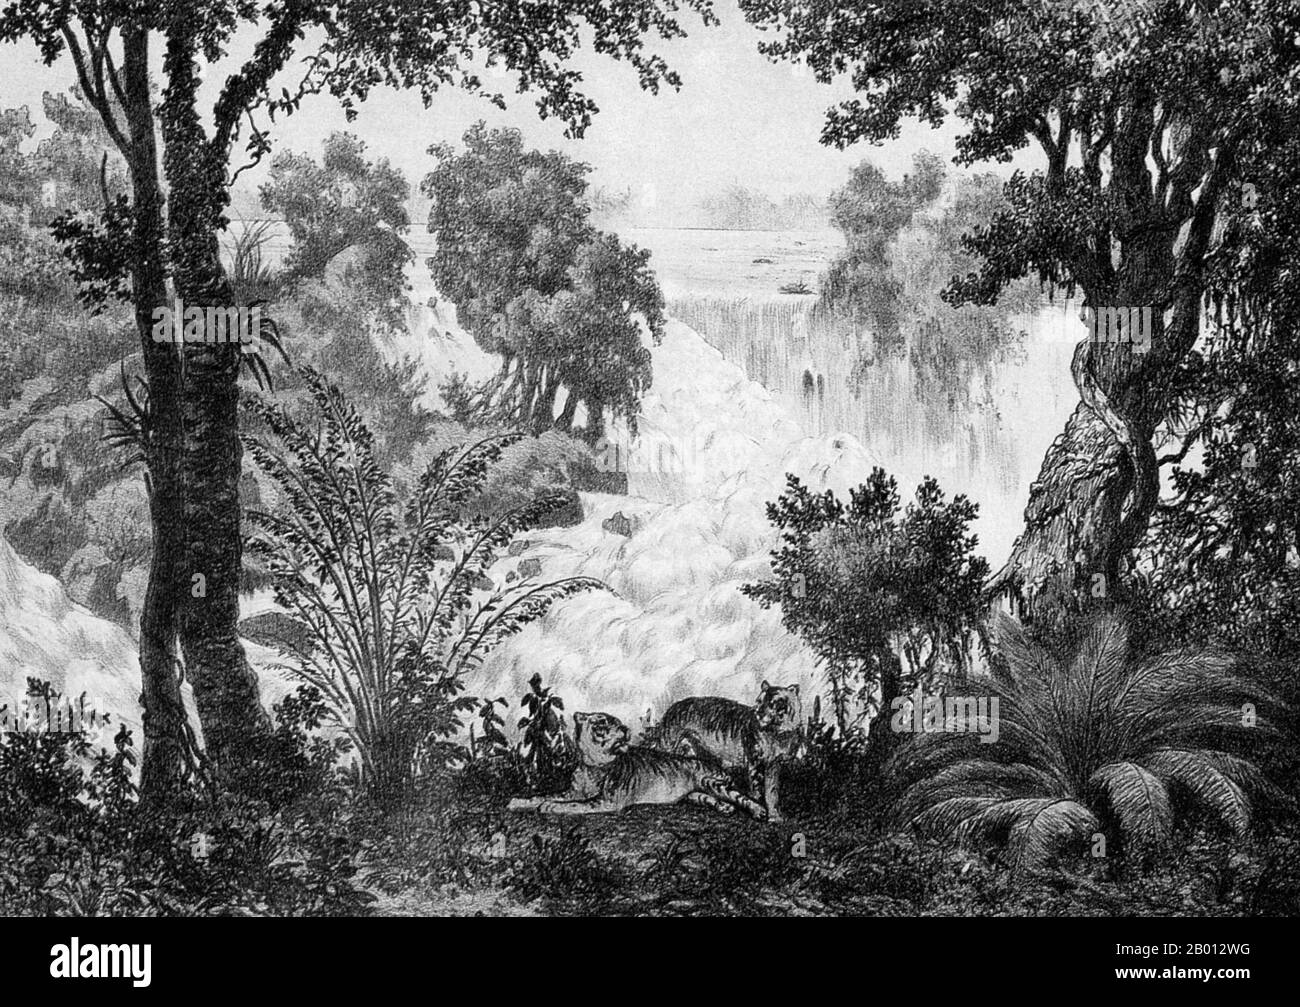 Laos: Tigers laze by the banks of the Mekong River at Don Isom waterfall near Khong Island (Don Khong). Engraving by Louis Delaporte (1842-1925), 1867.  This drawing by Louis Delaporte is one of dozens he produced during his two-year venture (1866-68) with the Mekong Exploration Commission sponsored by the French Ministry of the Navy, the intention of which was to lay the groundwork for the expansion of French colonies in Indochina. Traveling the Mekong by boat, the small French delegation voyaged from Saigon to Phnom Penh to Luang Prabang, then farther north into Upper Laos and Yunnan. Stock Photo